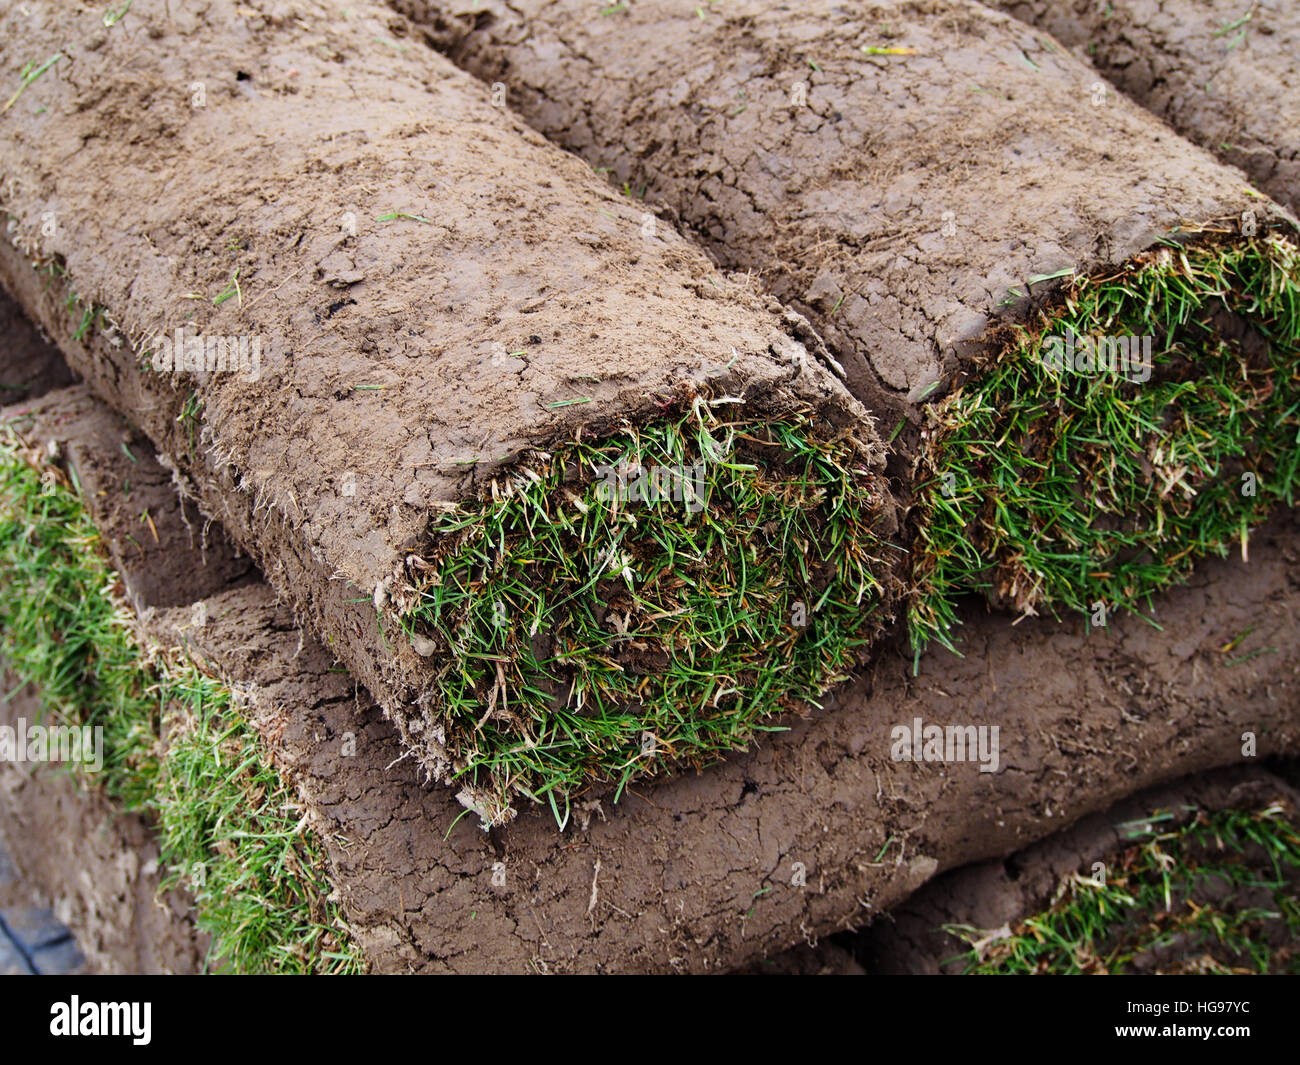 Image result for rolled up turf